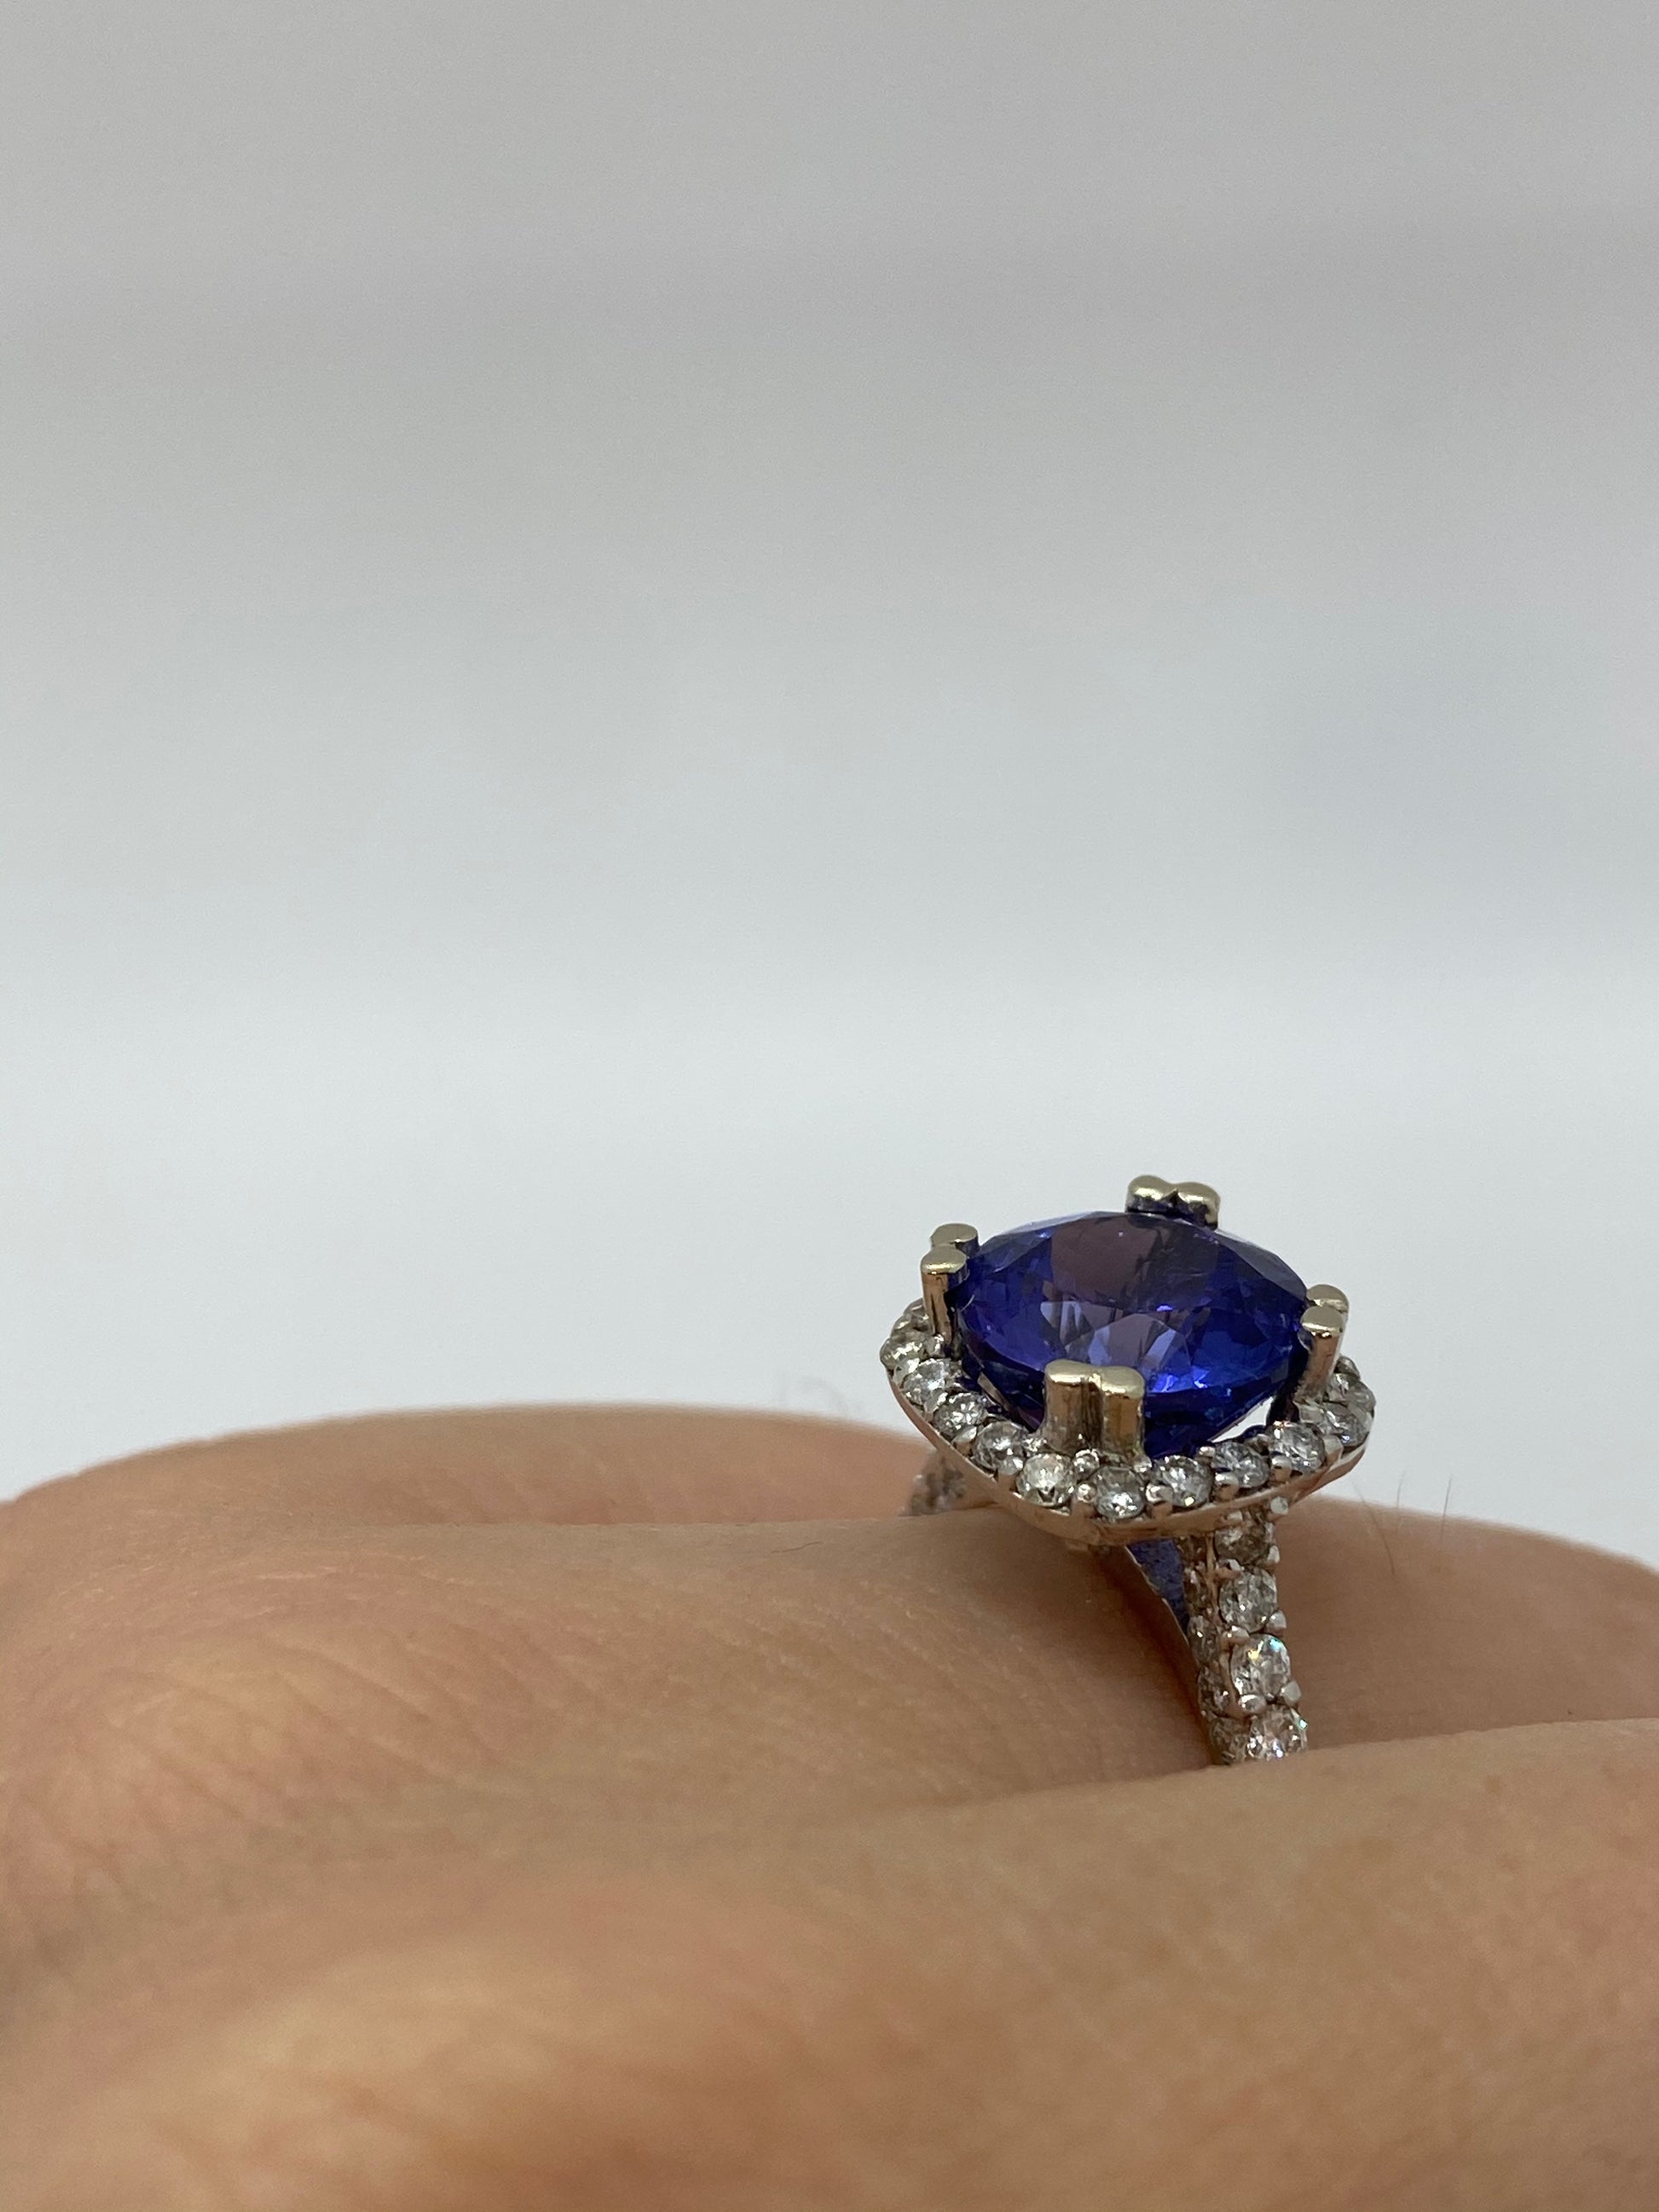 Tanzanite Ring R10406 - Royal Gems and Jewelry